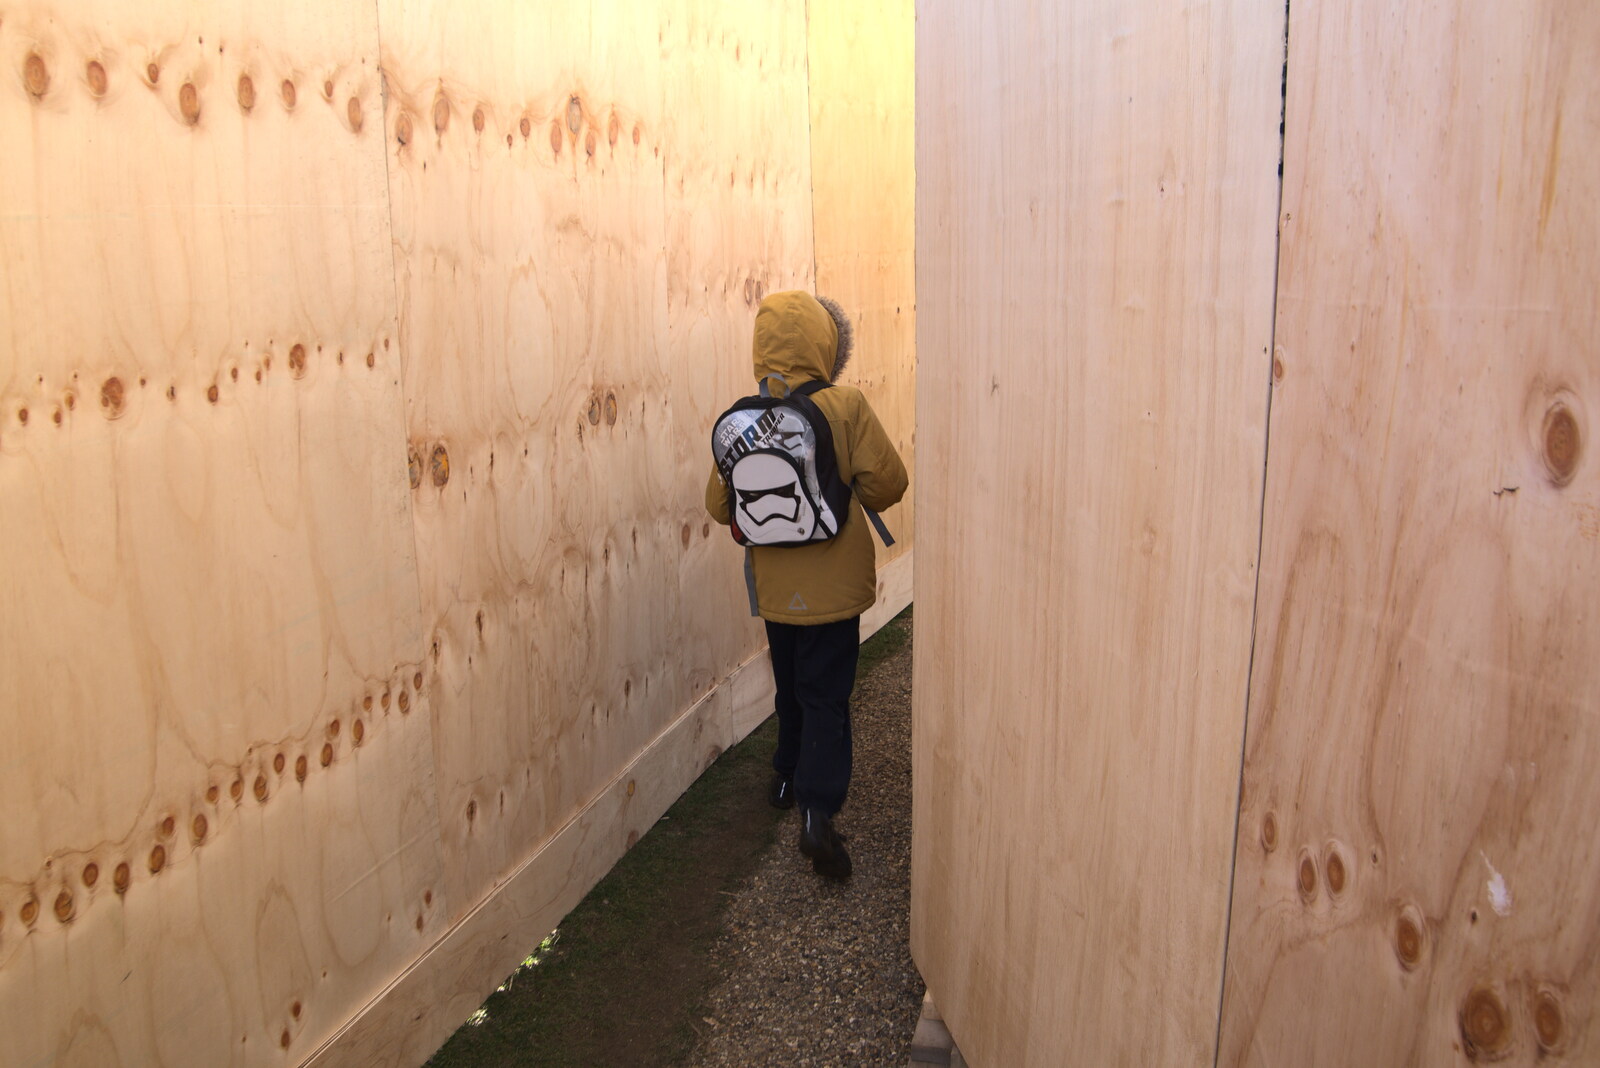 Harry walks through the safety corridor from A Trip to Orford Castle, Orford, Suffolk - 26th February 2022